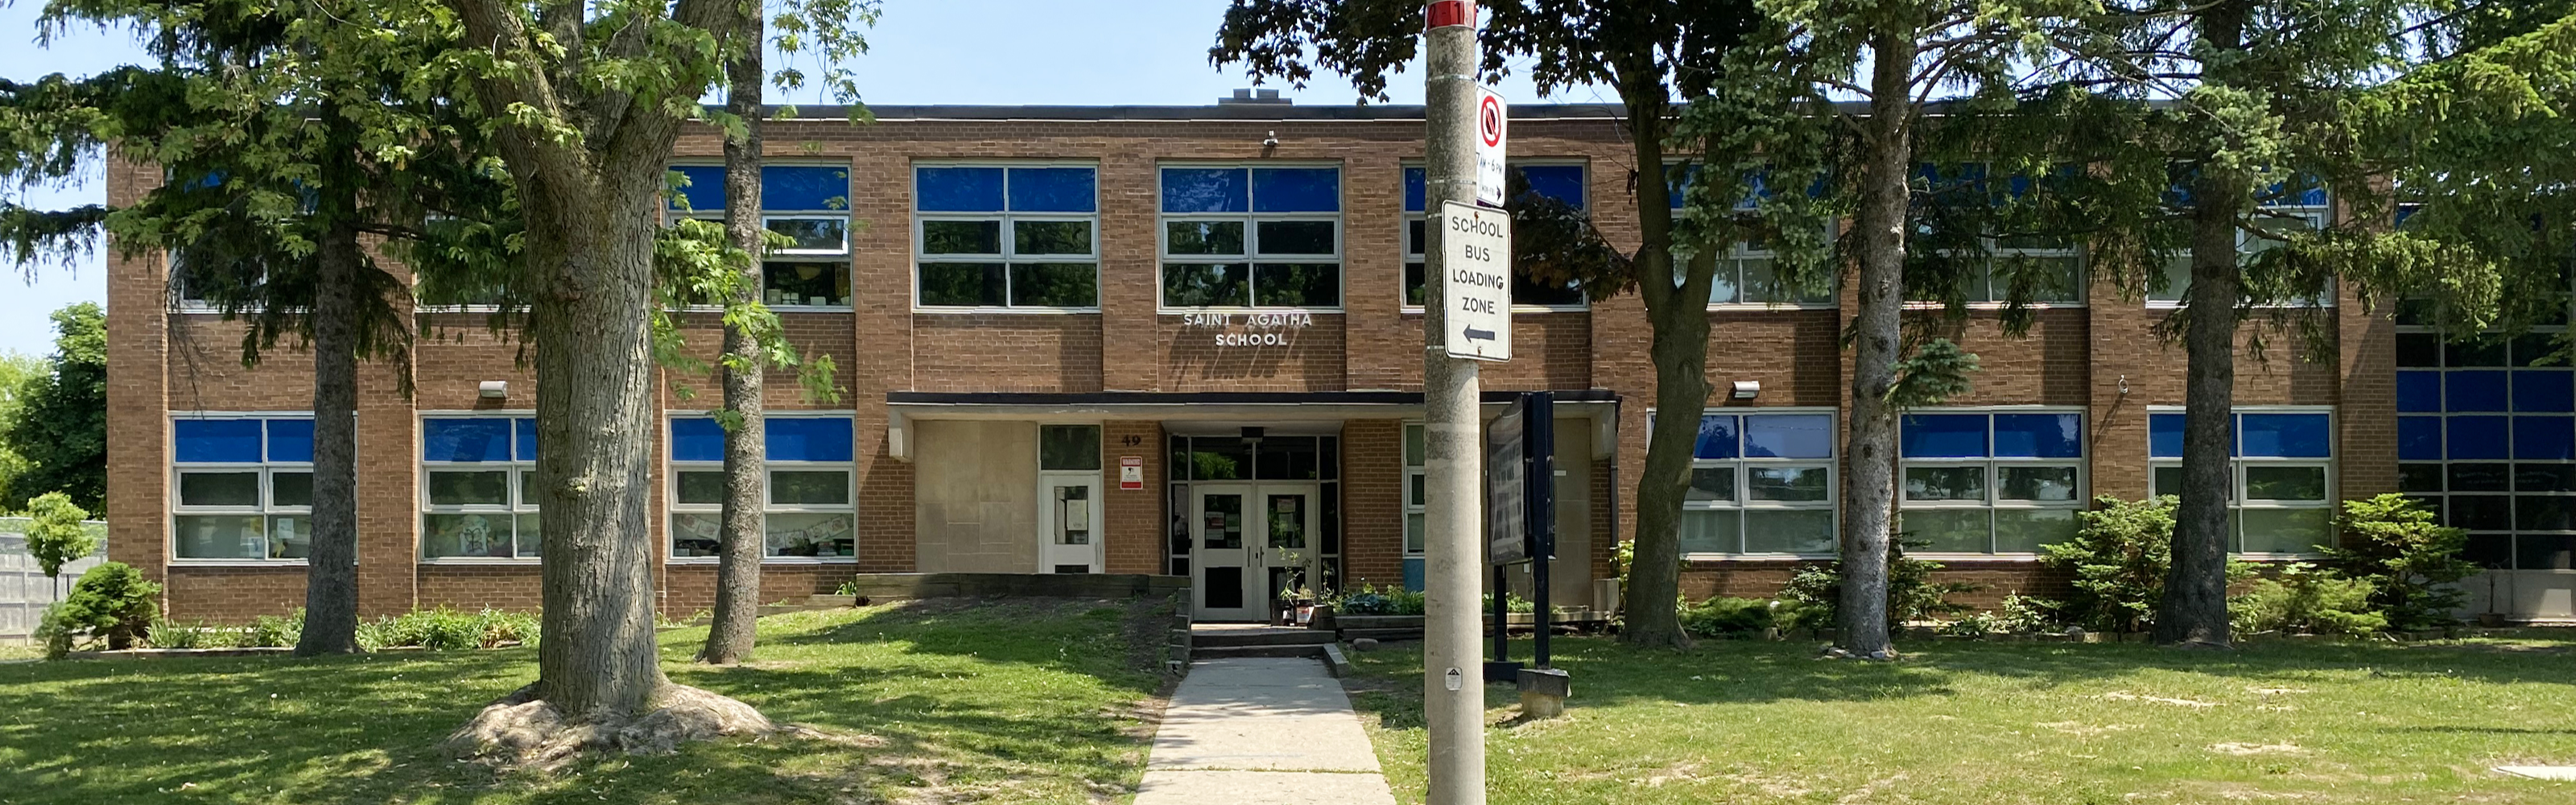 The front of the St. Agatha Catholic School building.